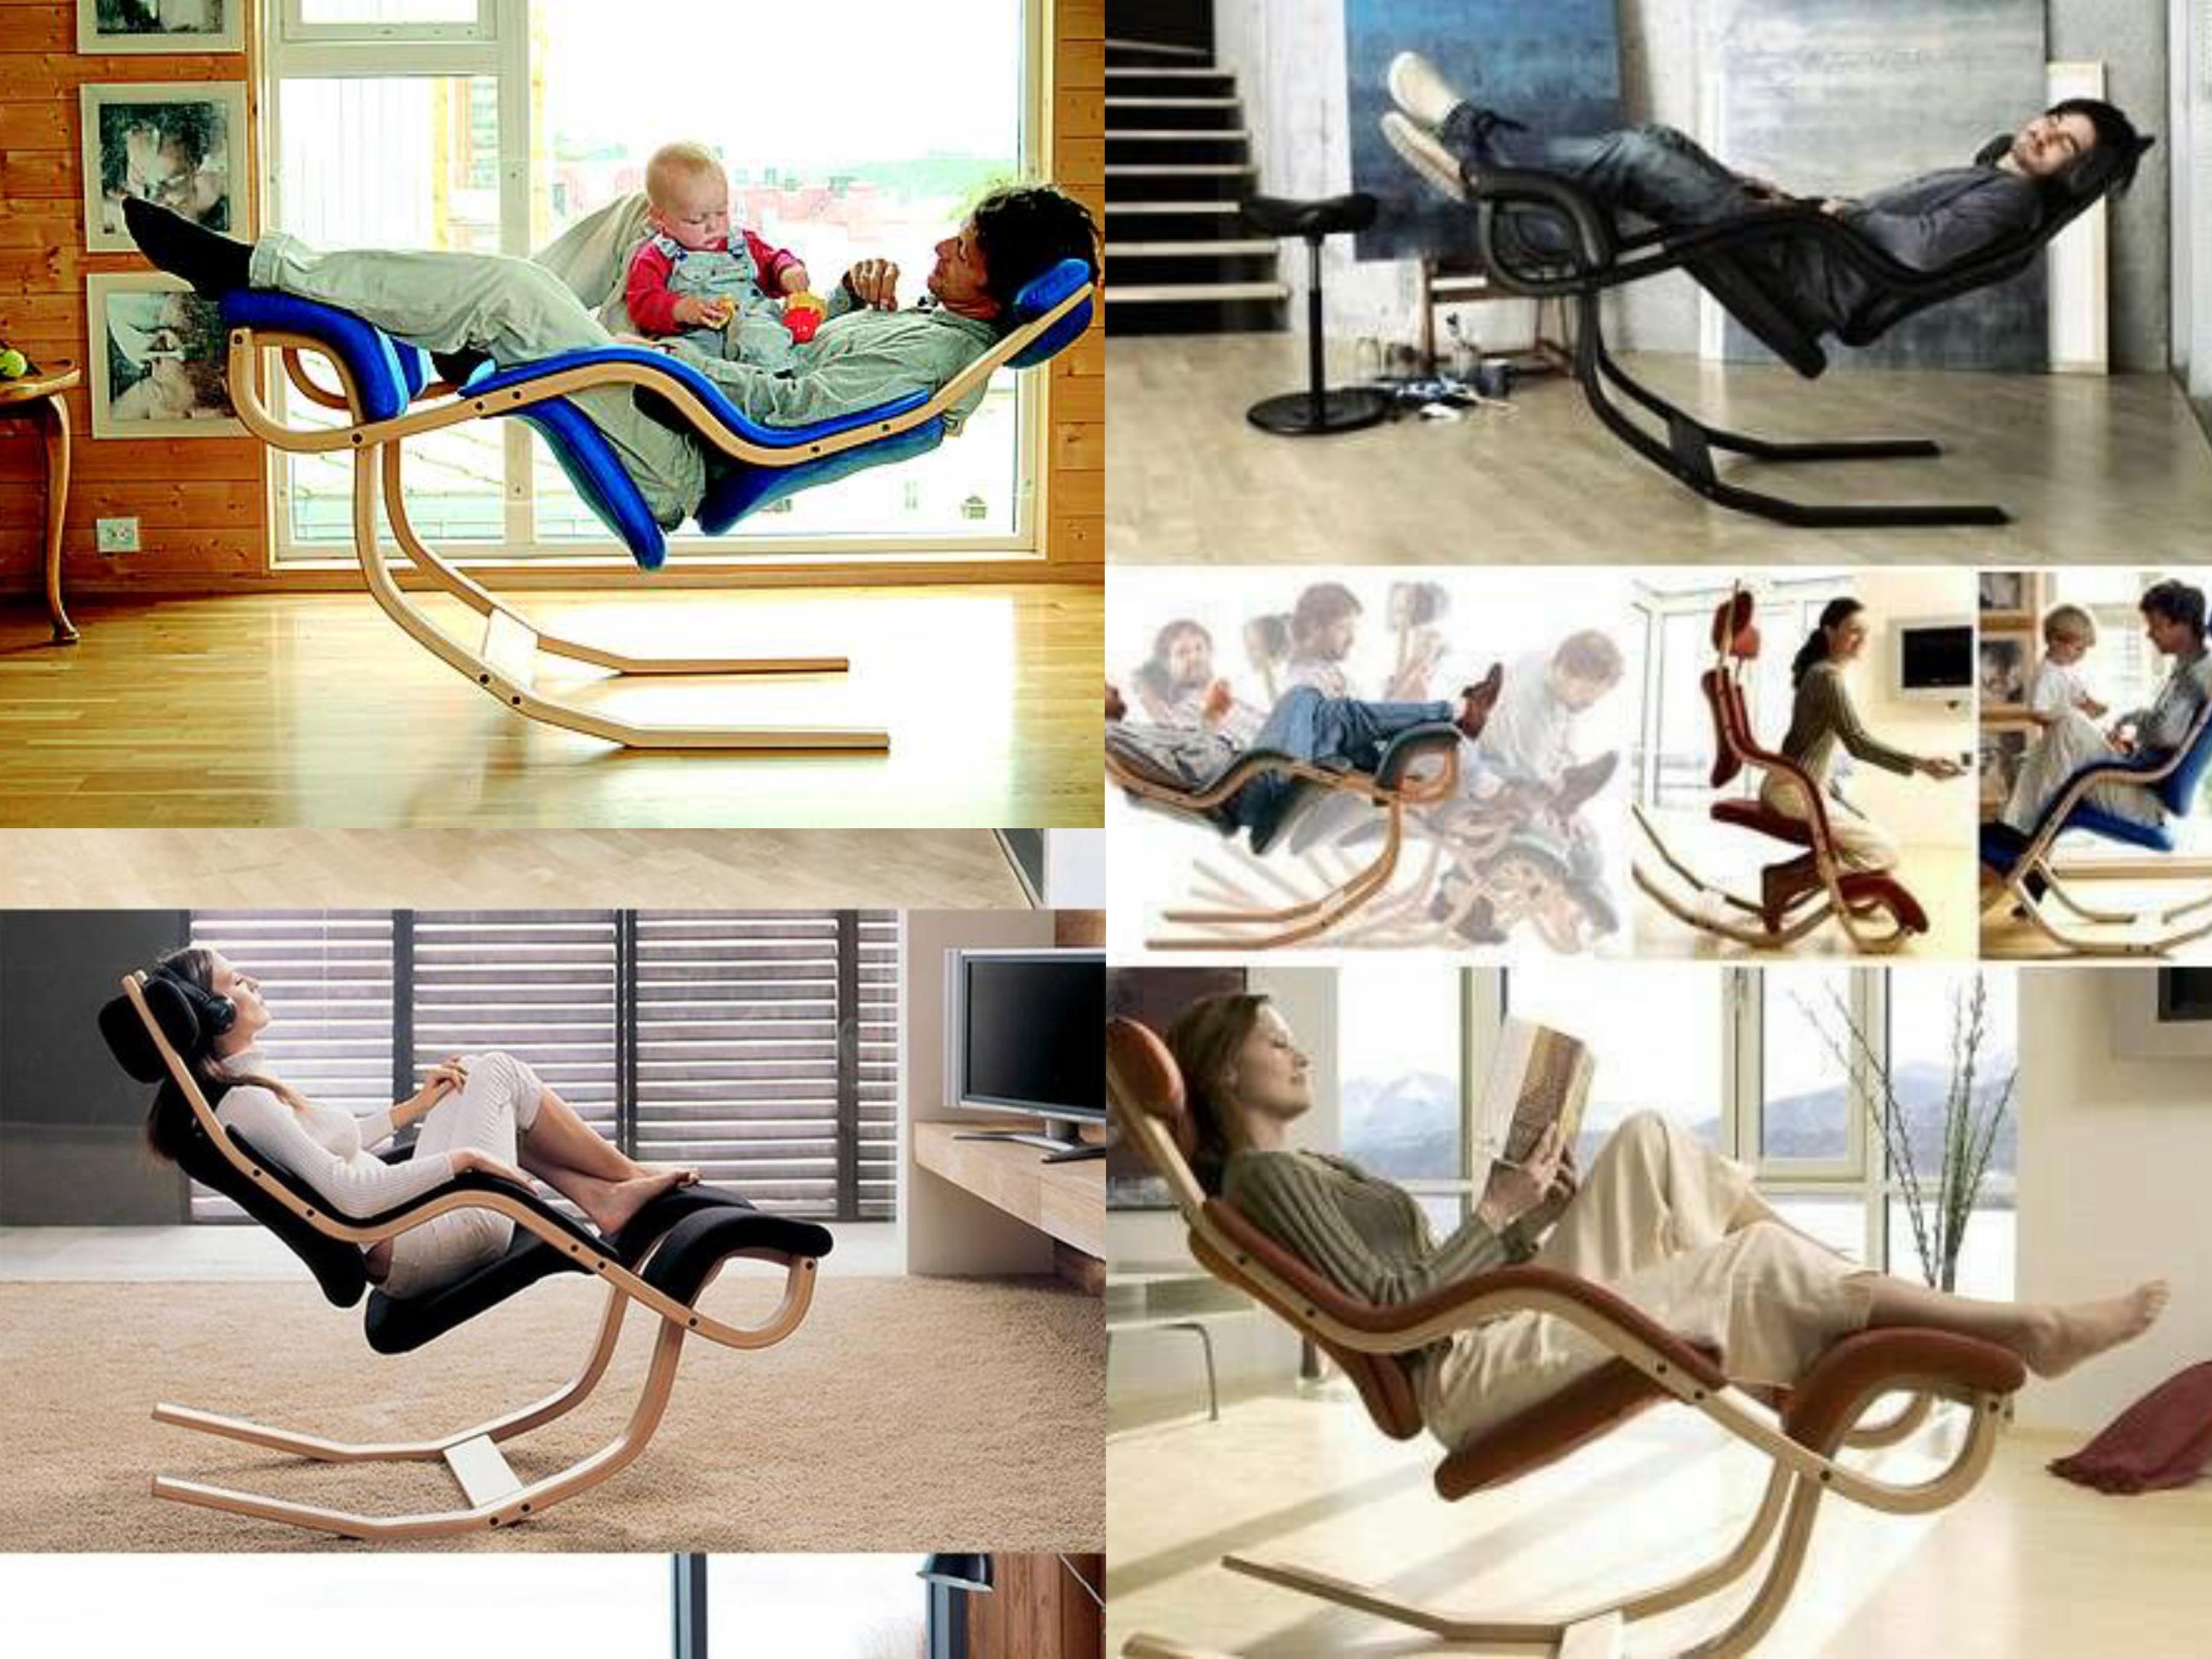 The Gravity chair is a design by Peter Opsvik for Stokke Mobler, Sweden 1984

This balancing lounge chair/daybed is a new and exciting experience for the user who uses it
This Gravity Balans chair is designed so that one can get through the